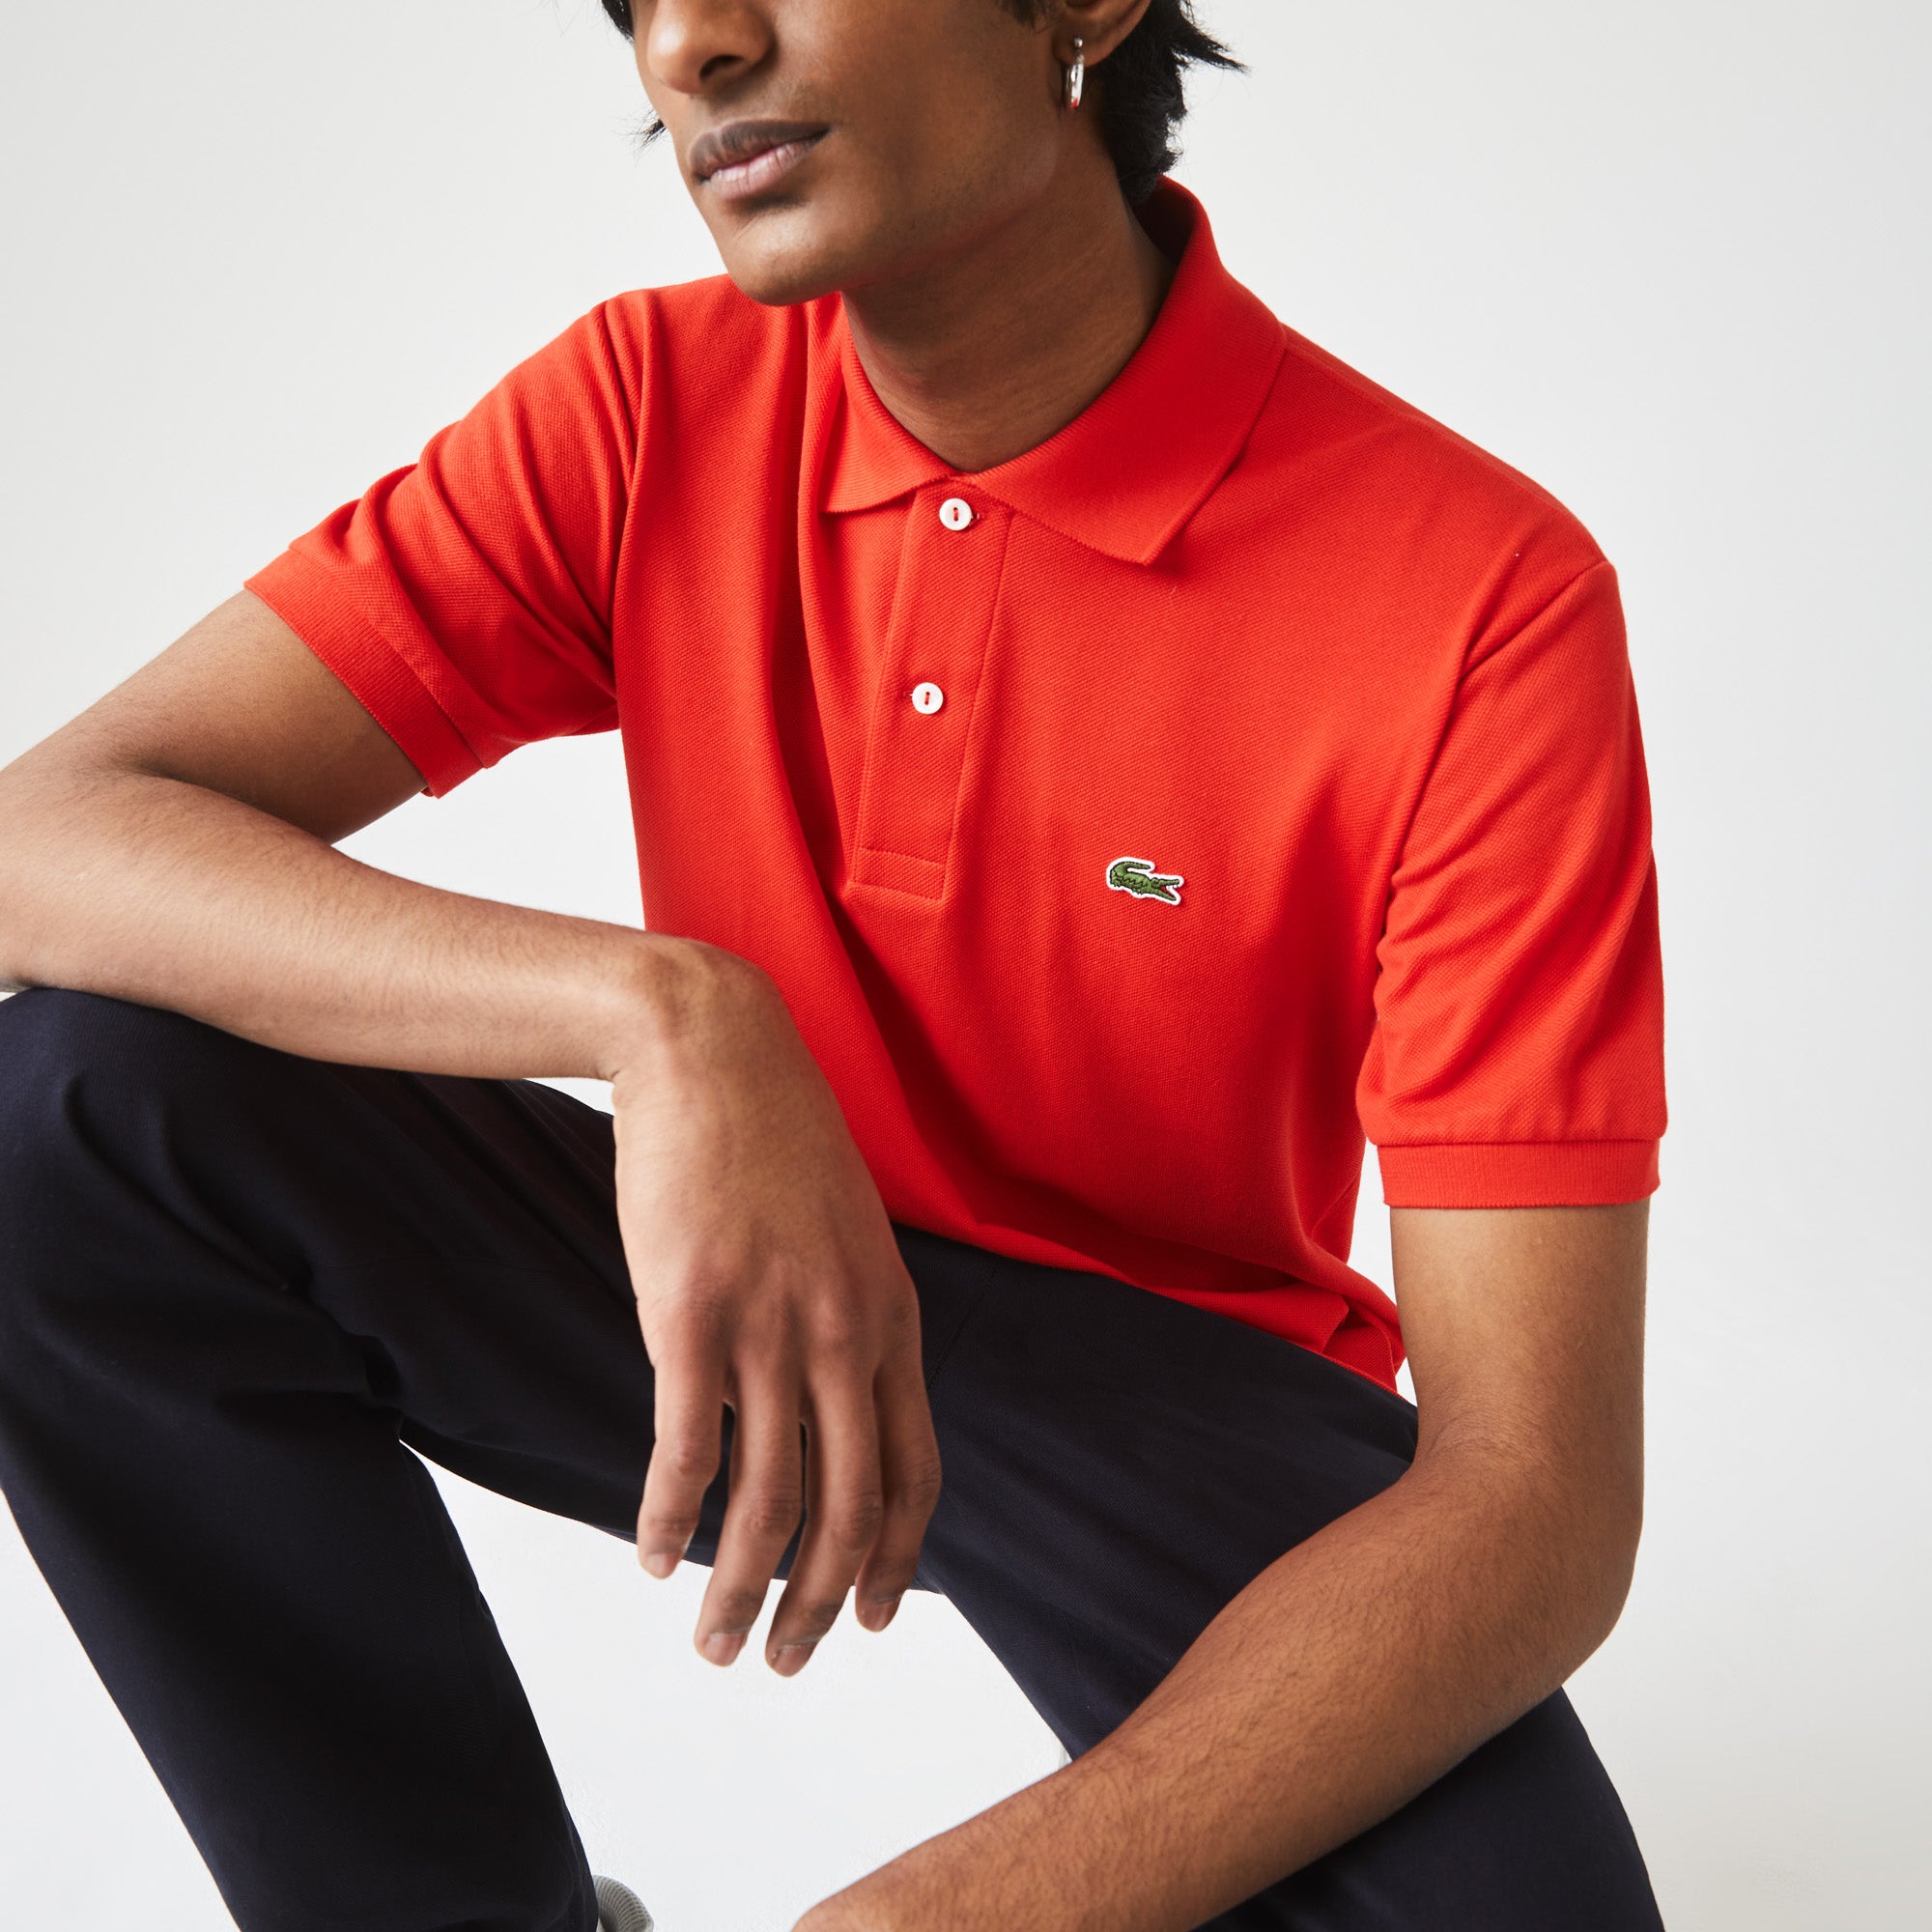 Lacoste Classic Fit Polo L.12.12 Red Redcurrant Rush